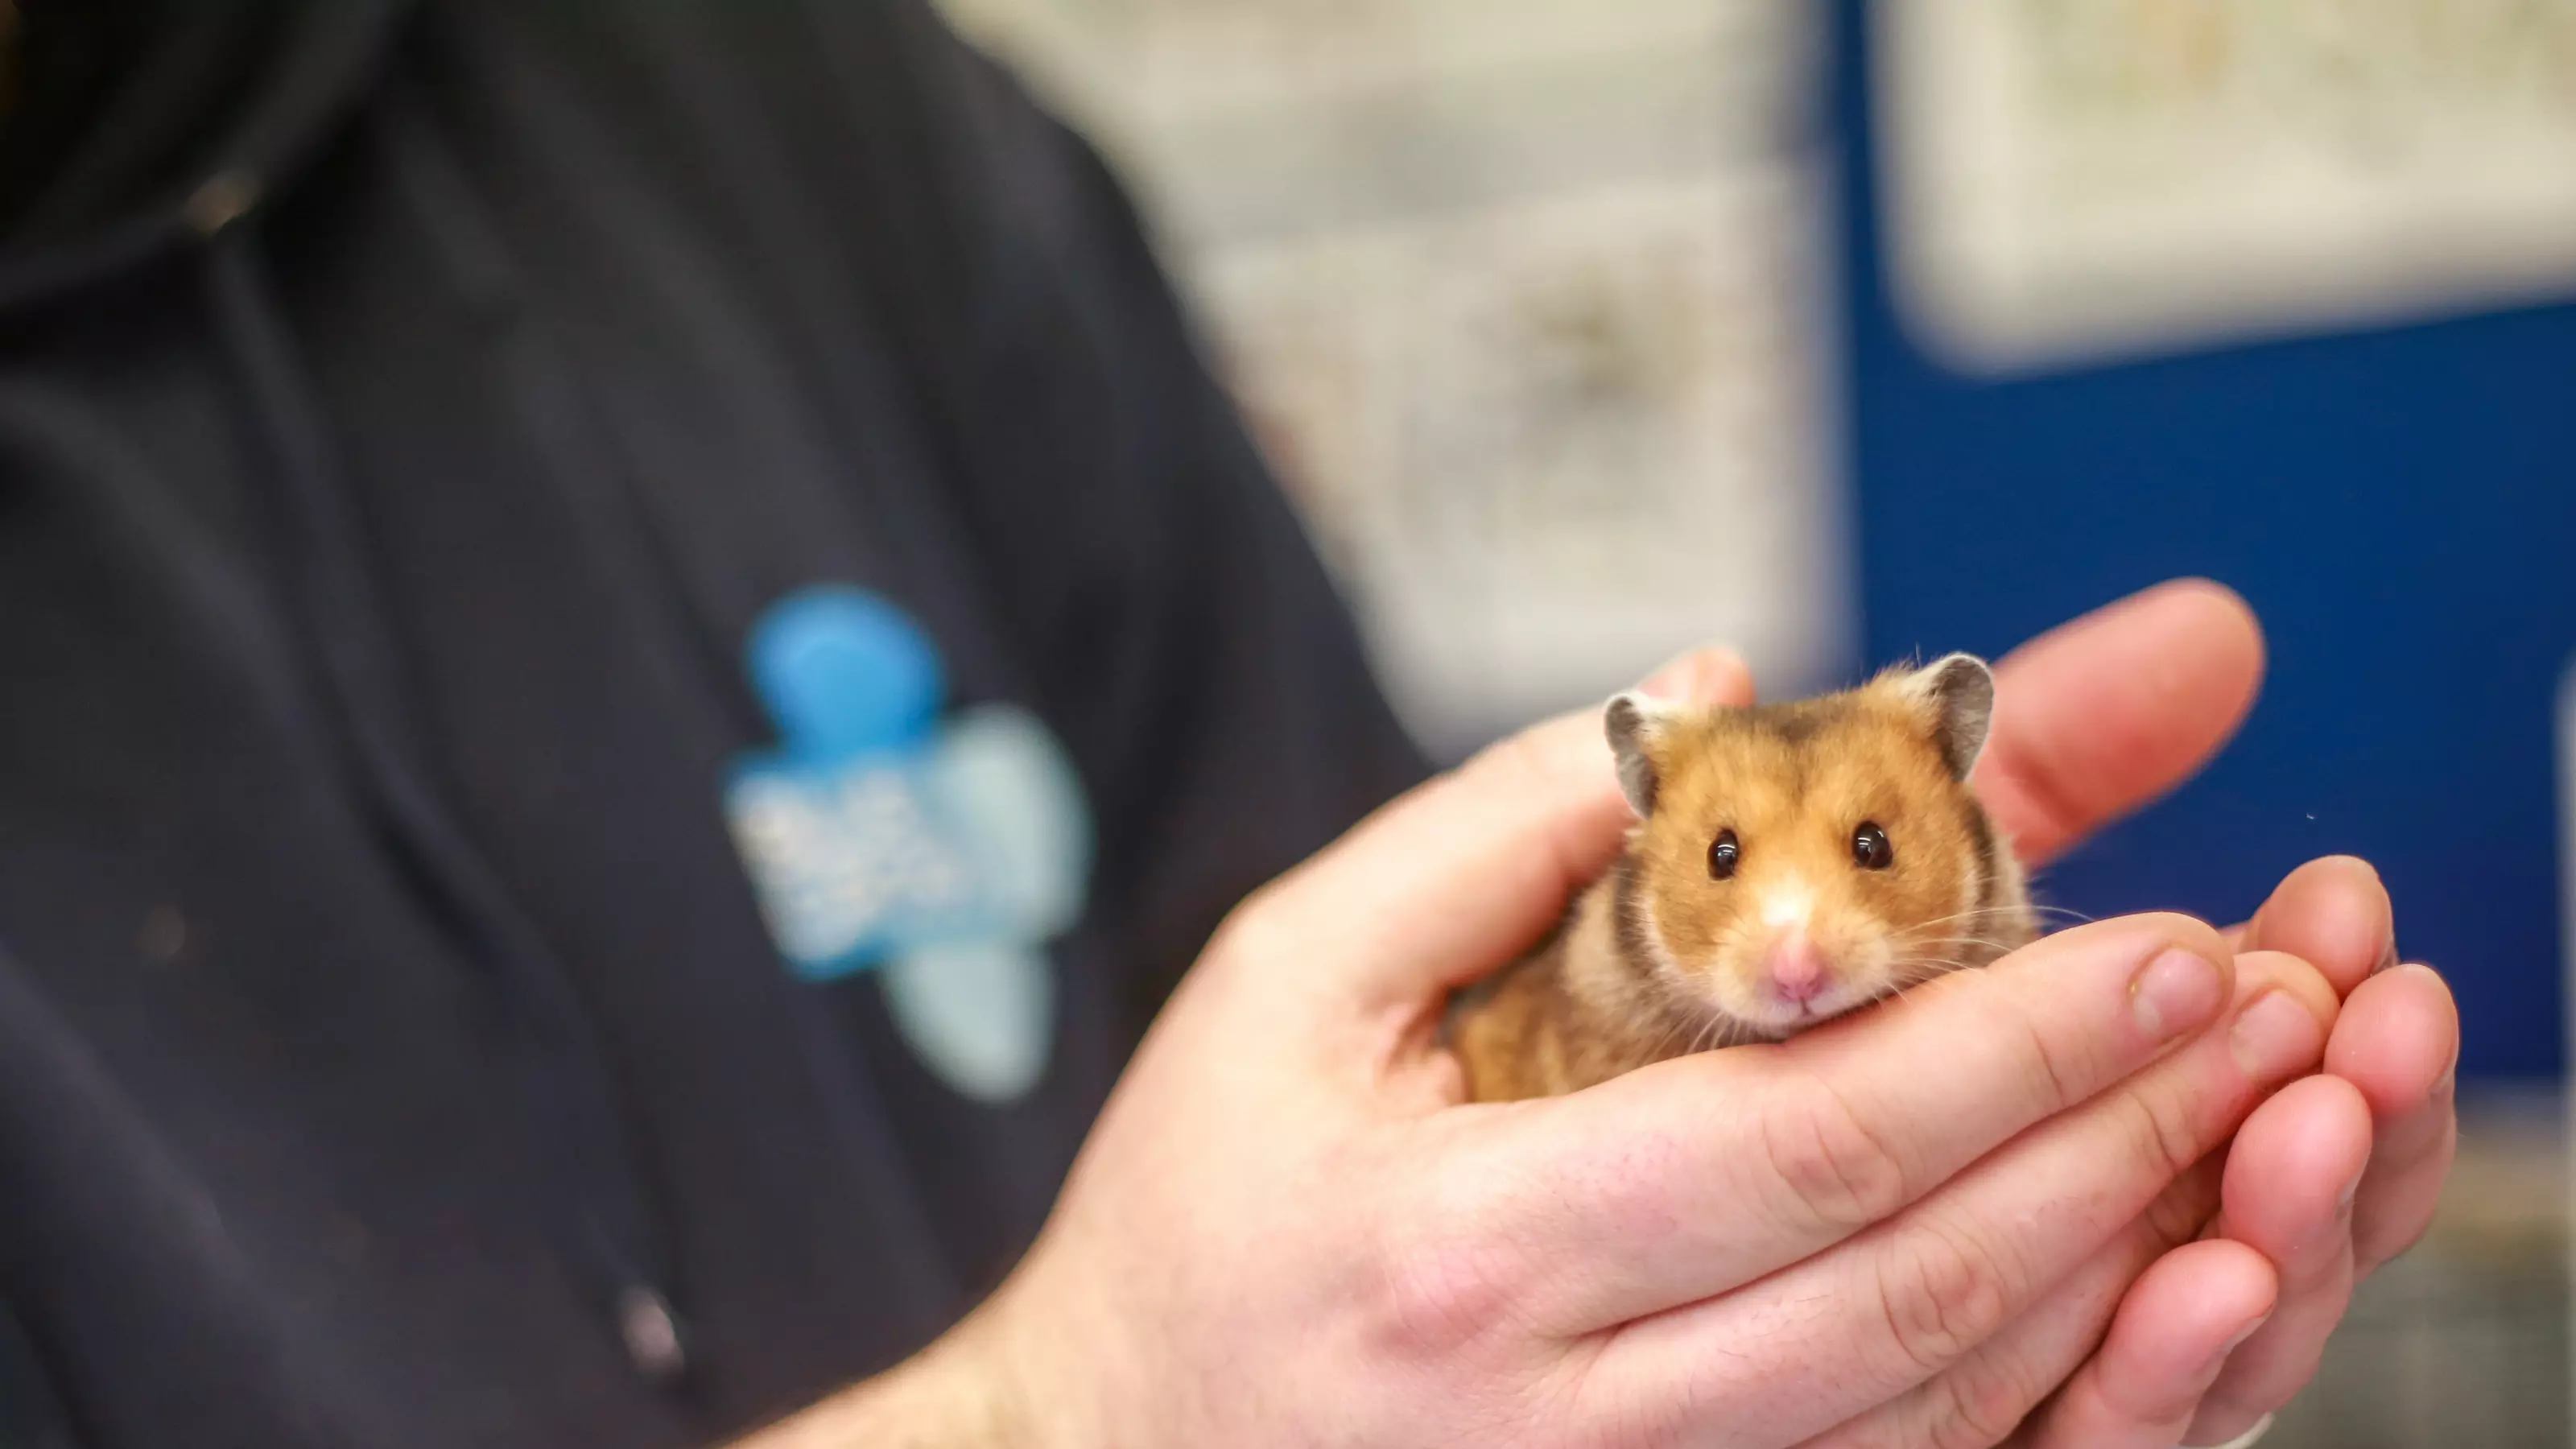 A Blue Cross employee holds a hamster in his hands. The Blue Cross logo can be seen on the employee's fleece in the background.